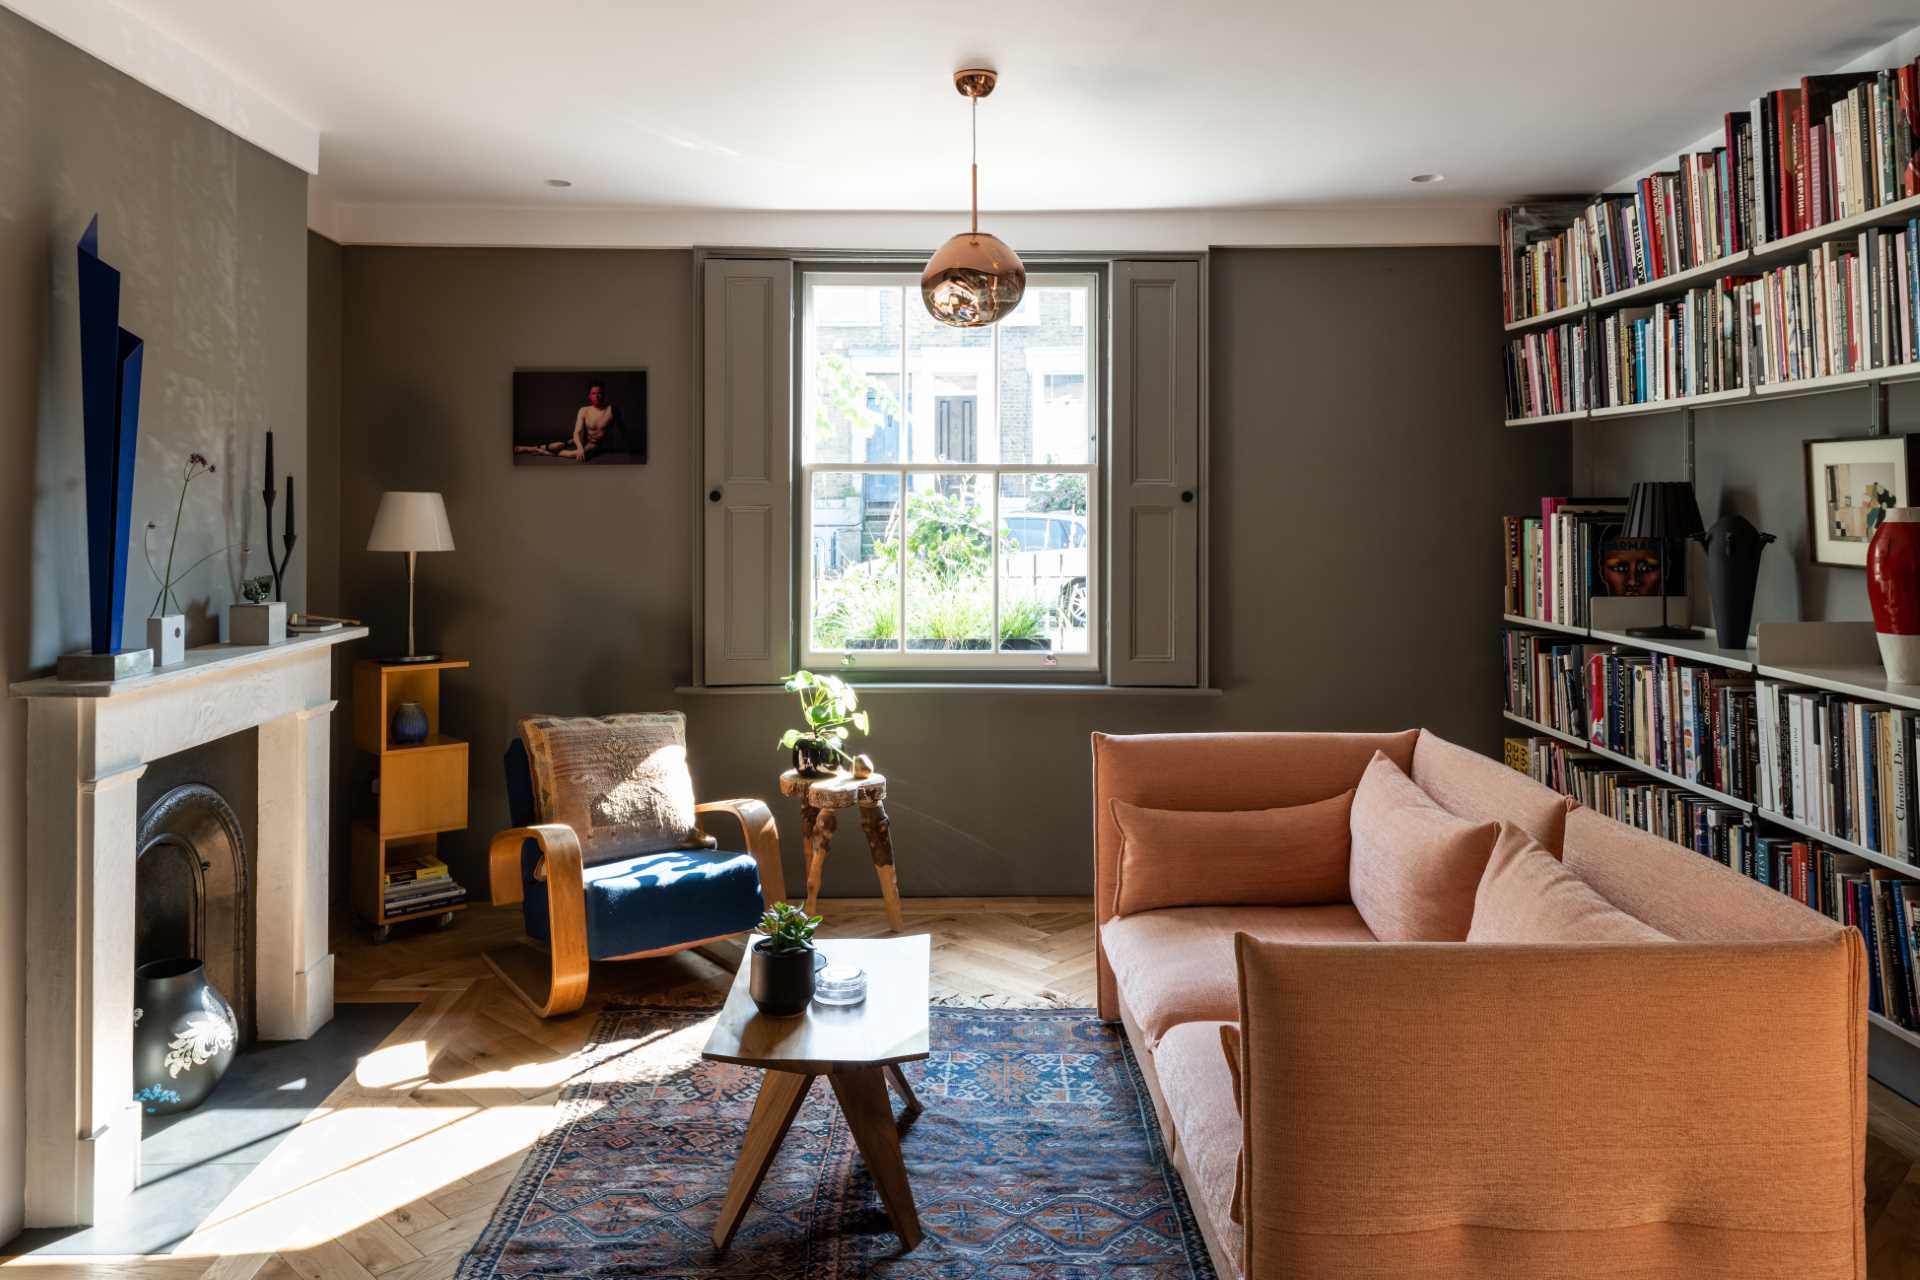 This living room, with views of the street, has wall-mounted bookshelves and dark walls.